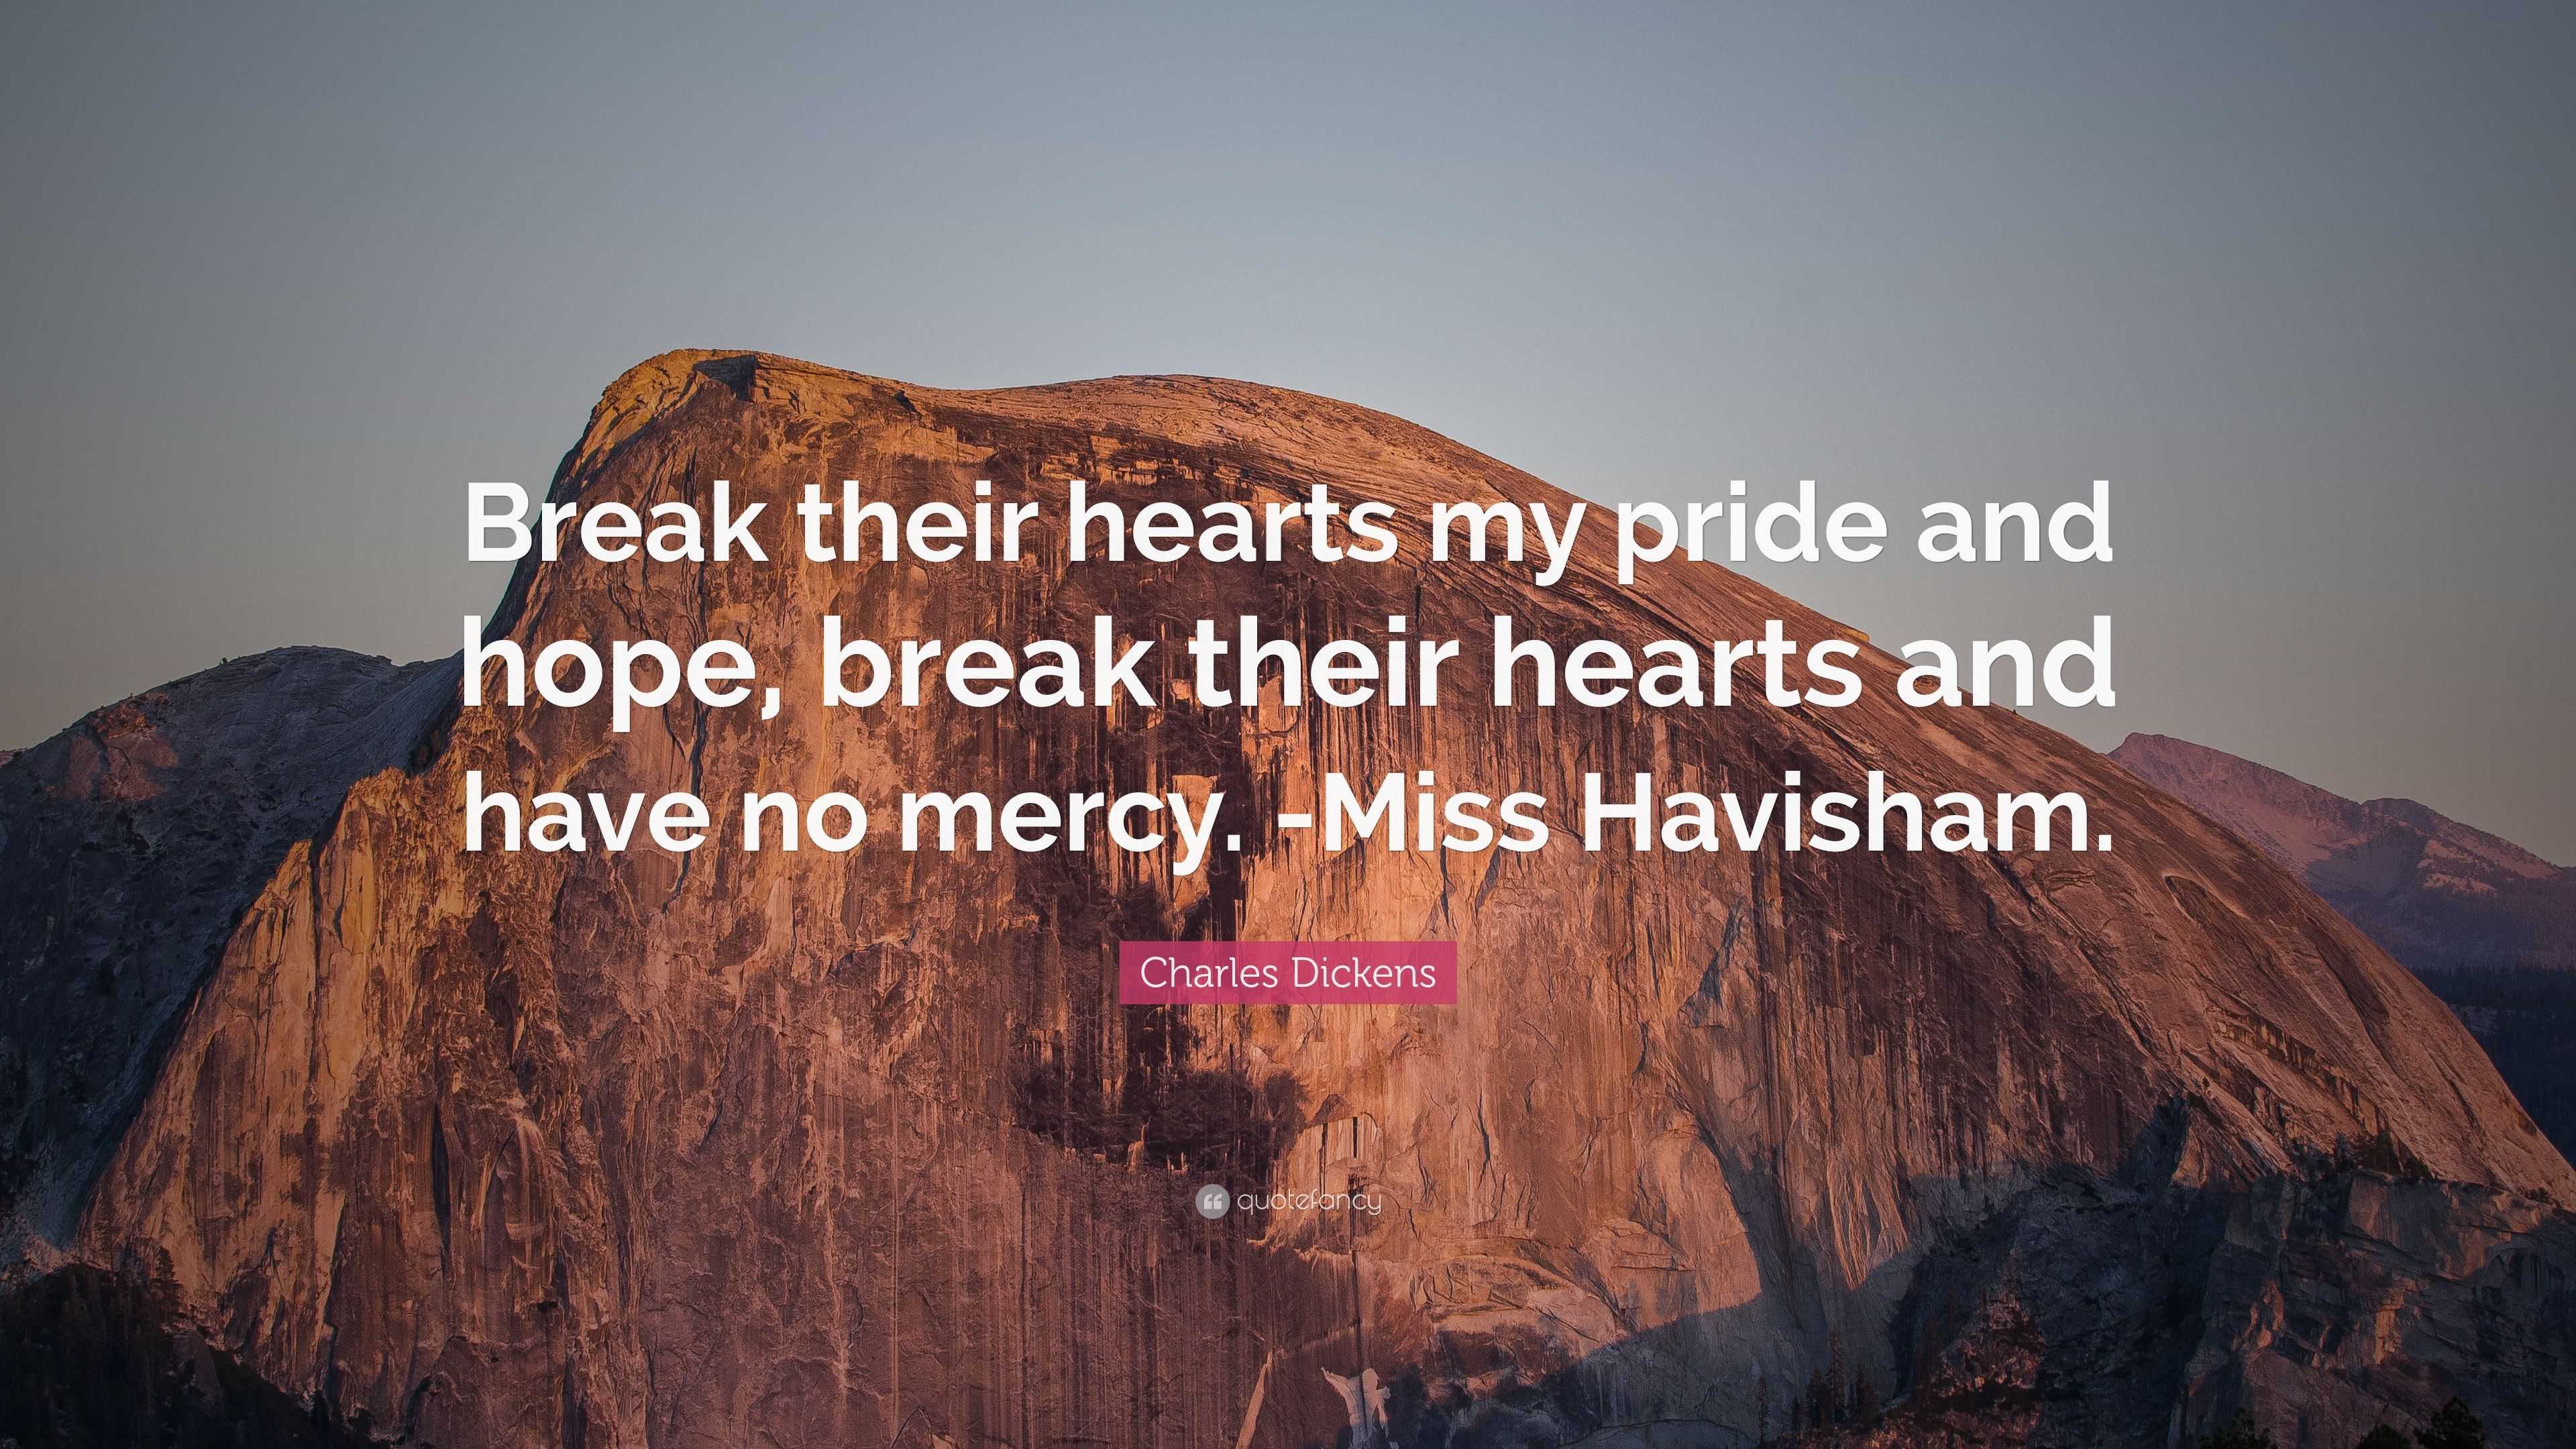 Charles Dickens Quote “Break their hearts my pride and hope break their hearts